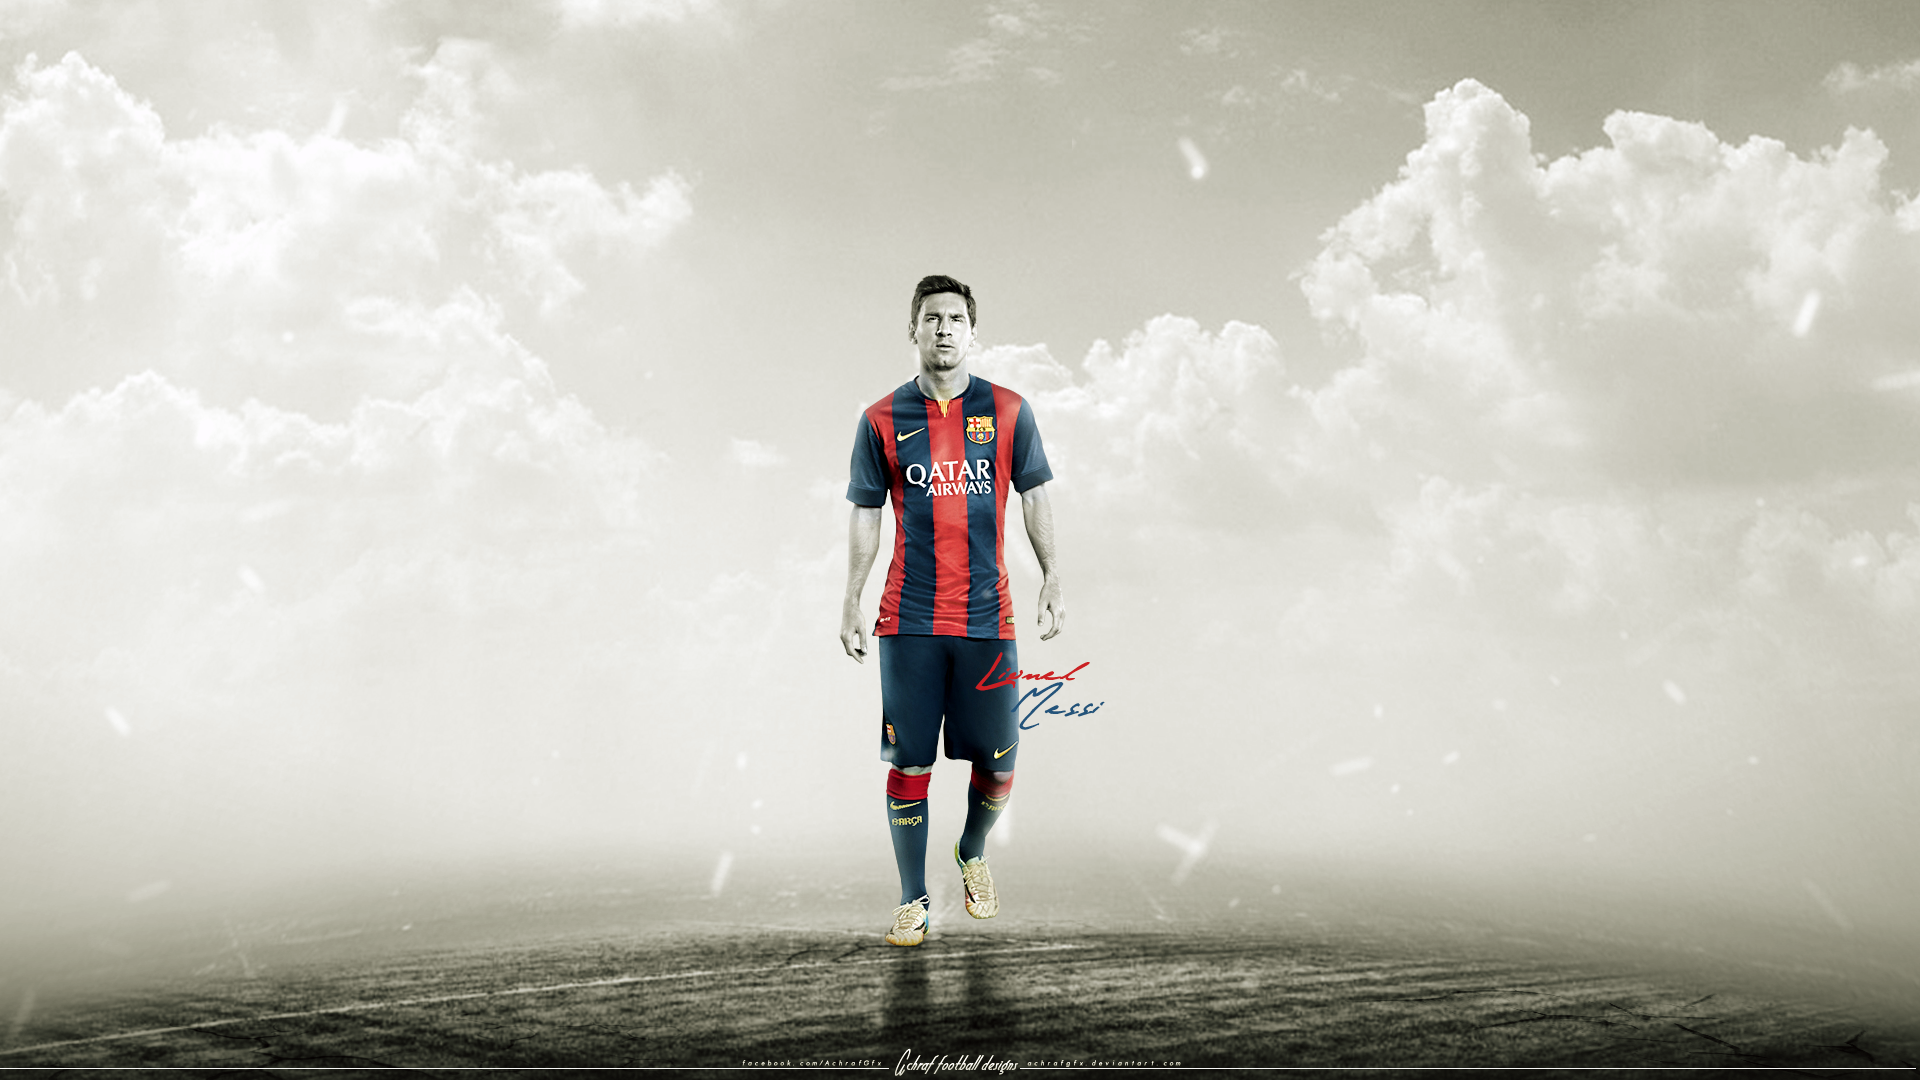 People 1920x1080 Lionel Messi men sport watermarked soccer player FC Barcelona Argentinian